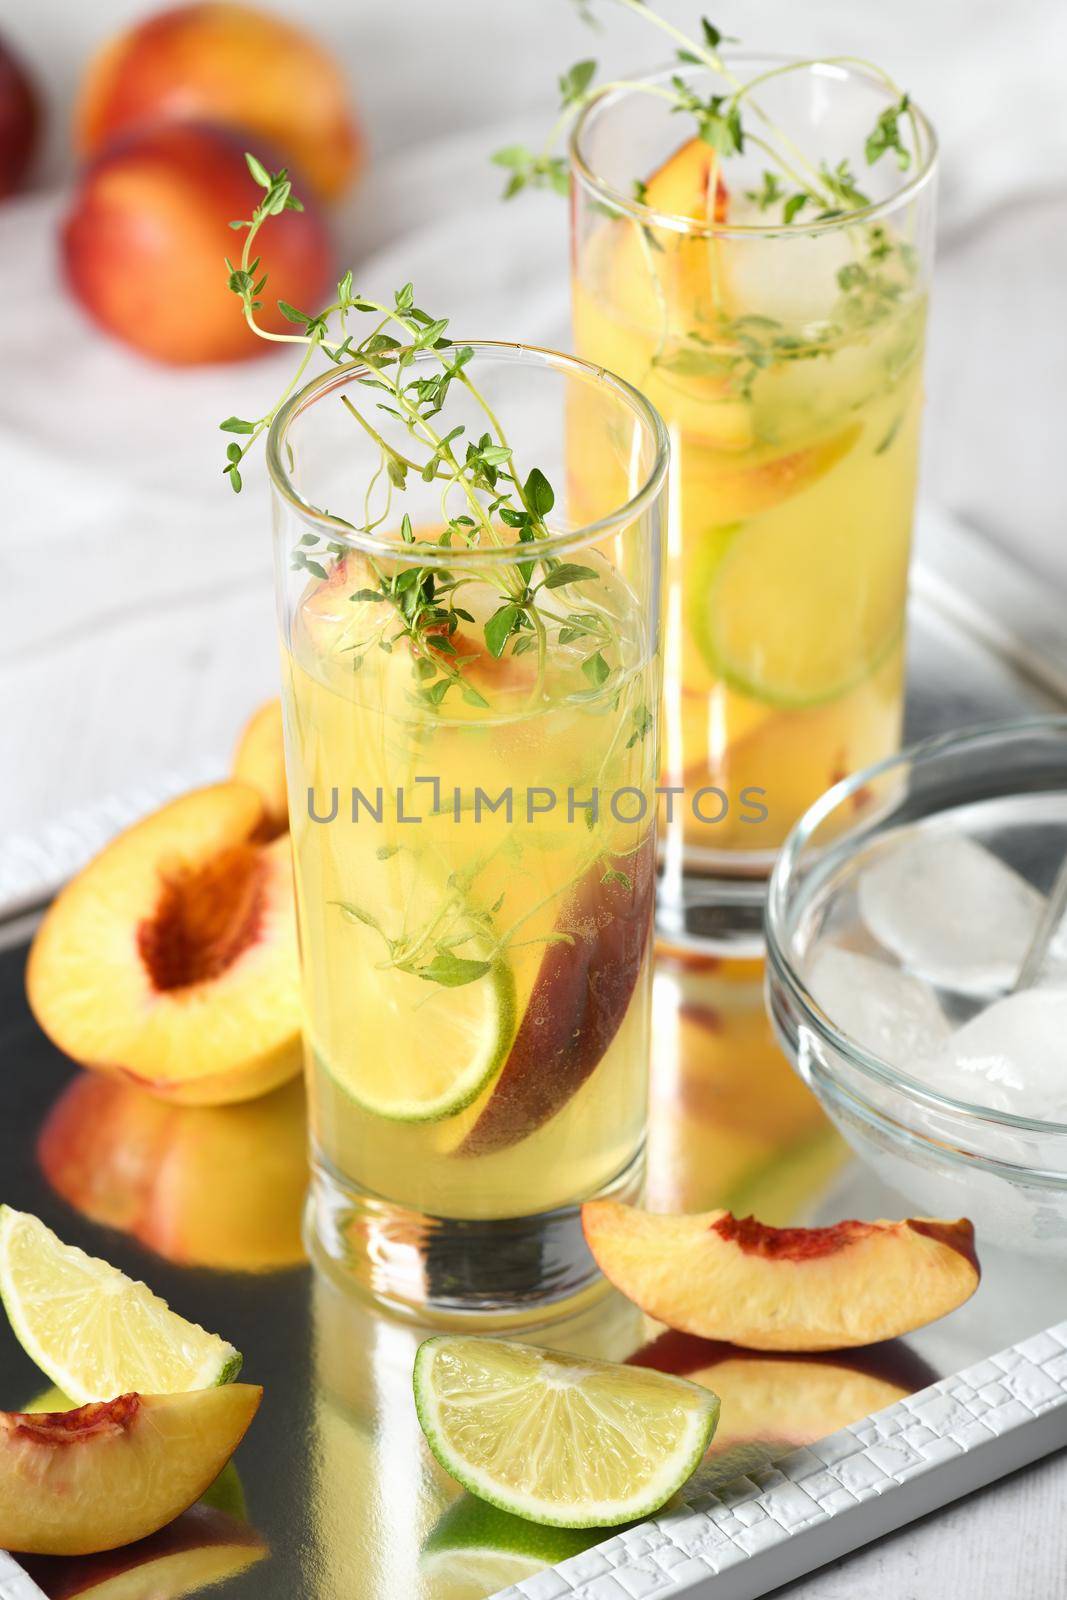 Peach lemonade with thyme by Apolonia